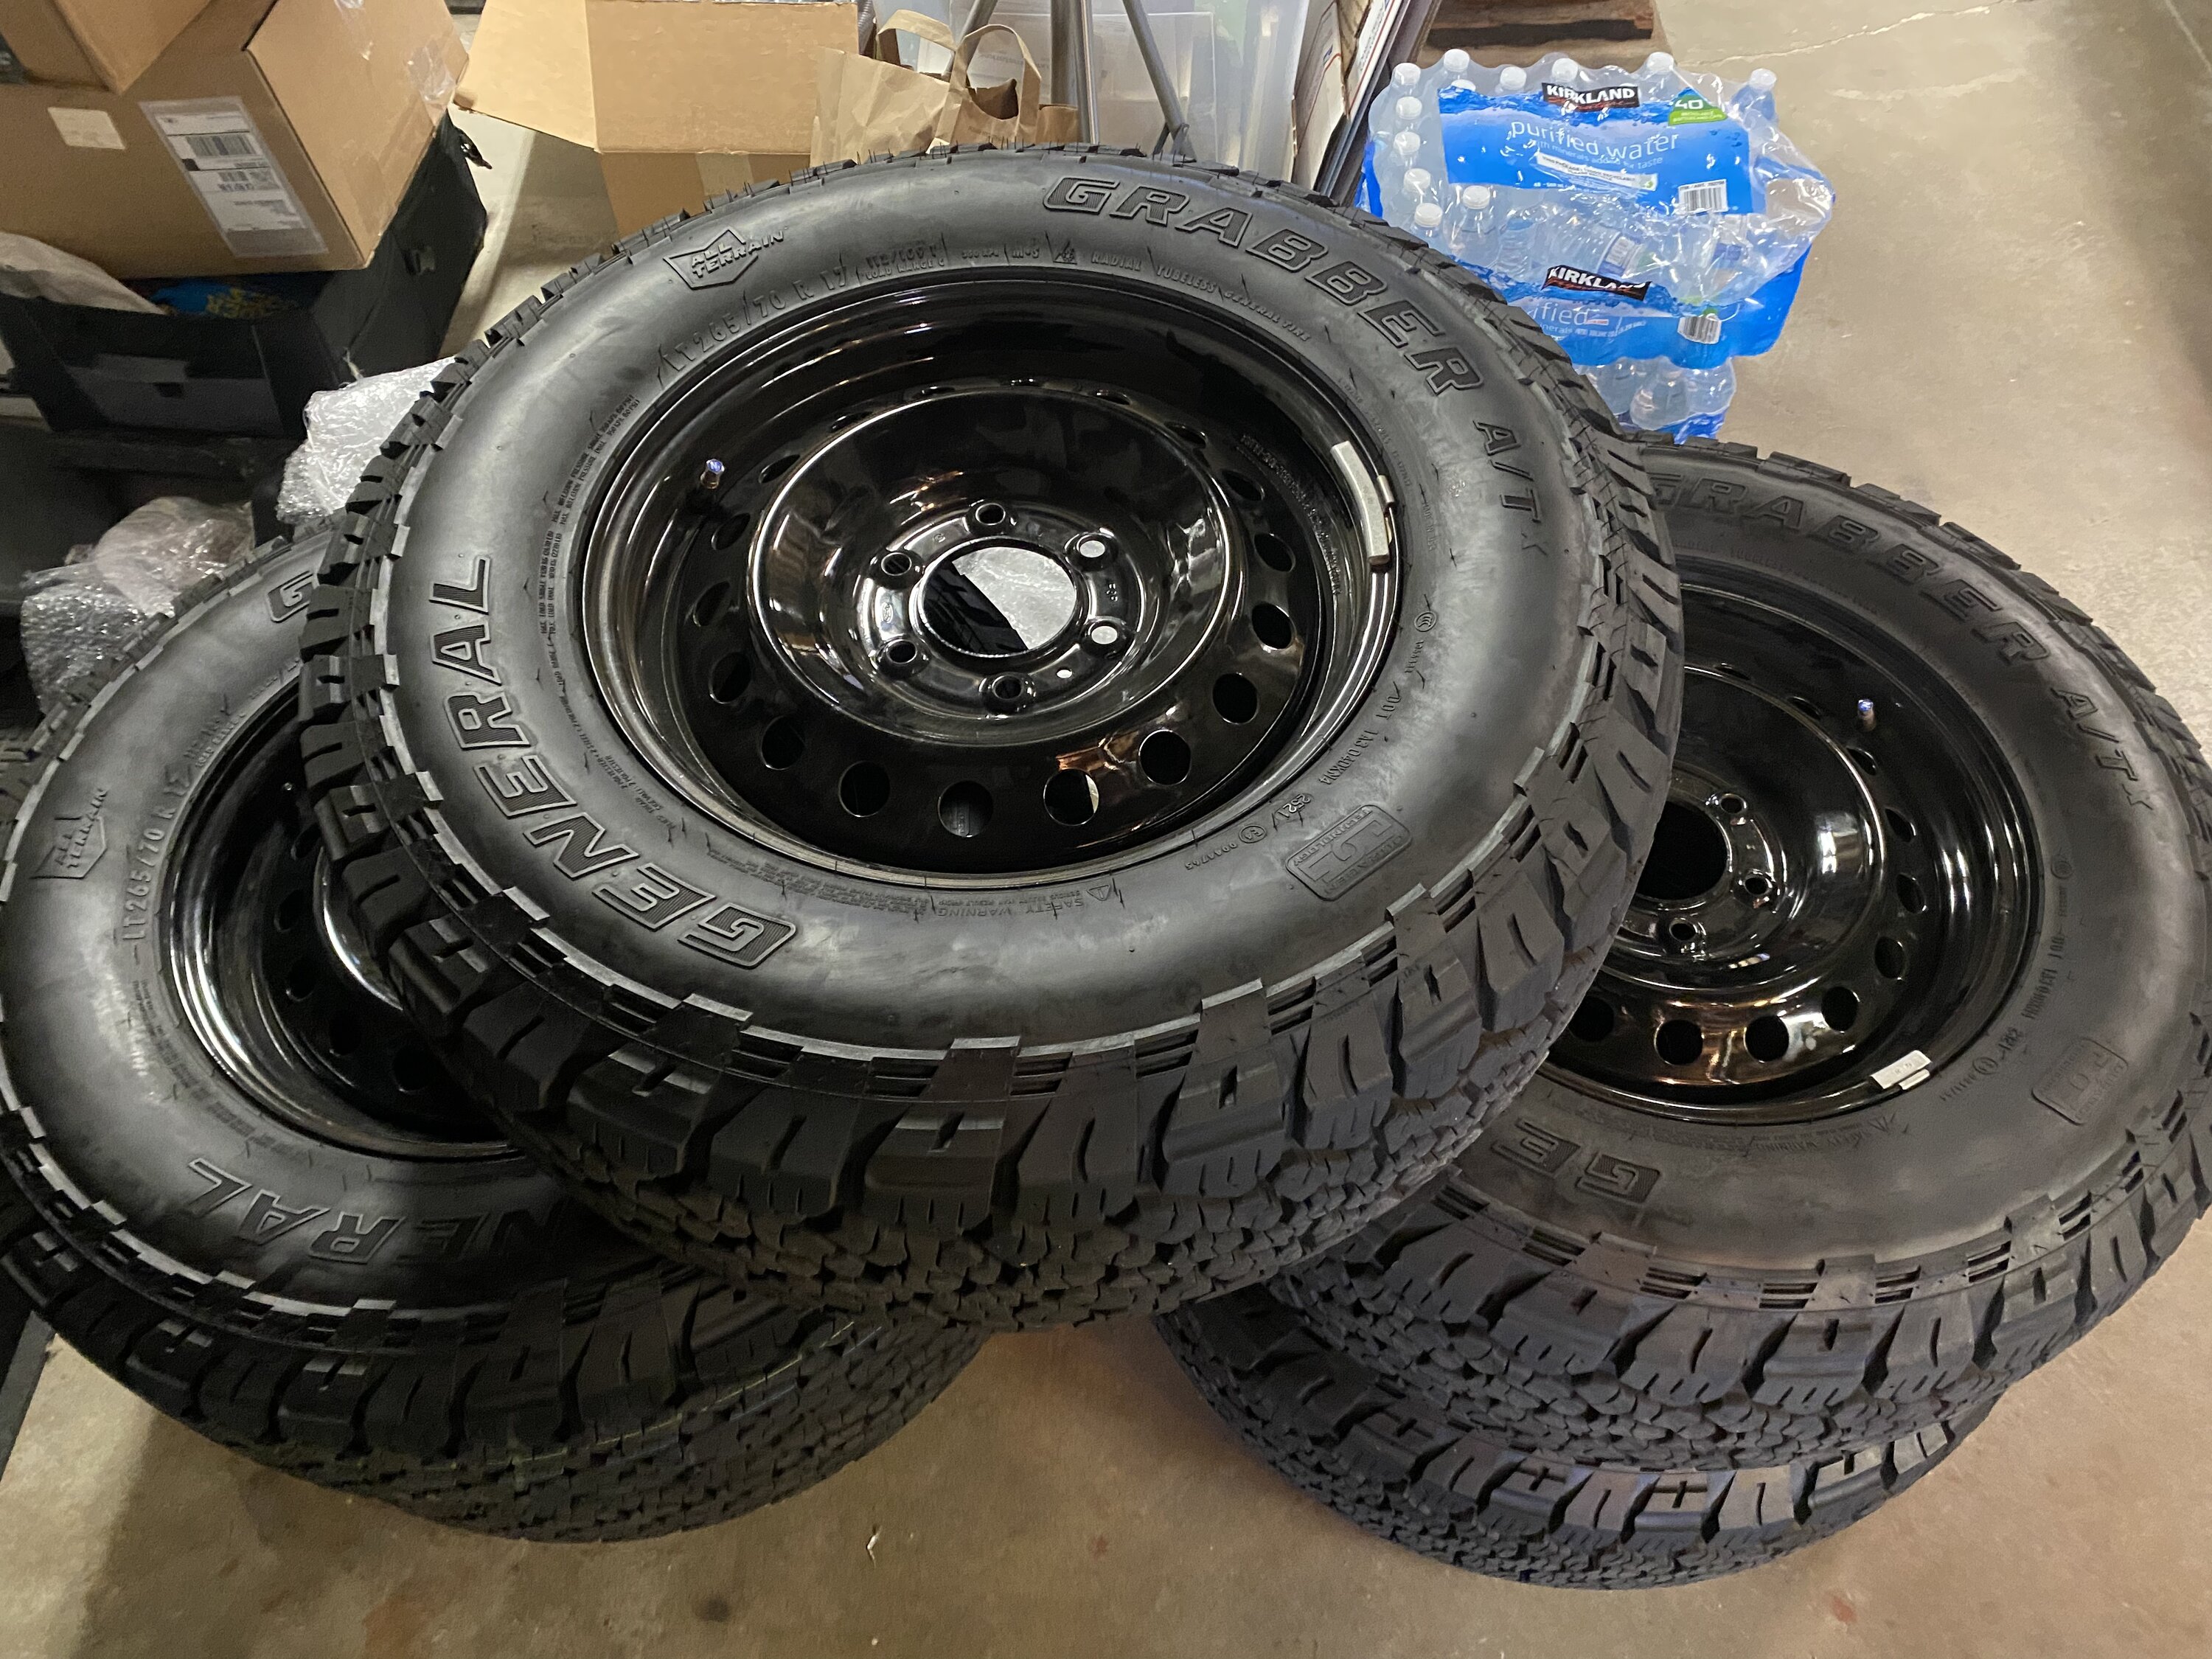 Ford Bronco For sale: Stock Black Diamond steelies and tires.  And stock rock slider rails. E260C272-6D41-4443-BDFE-C475E8938AC7